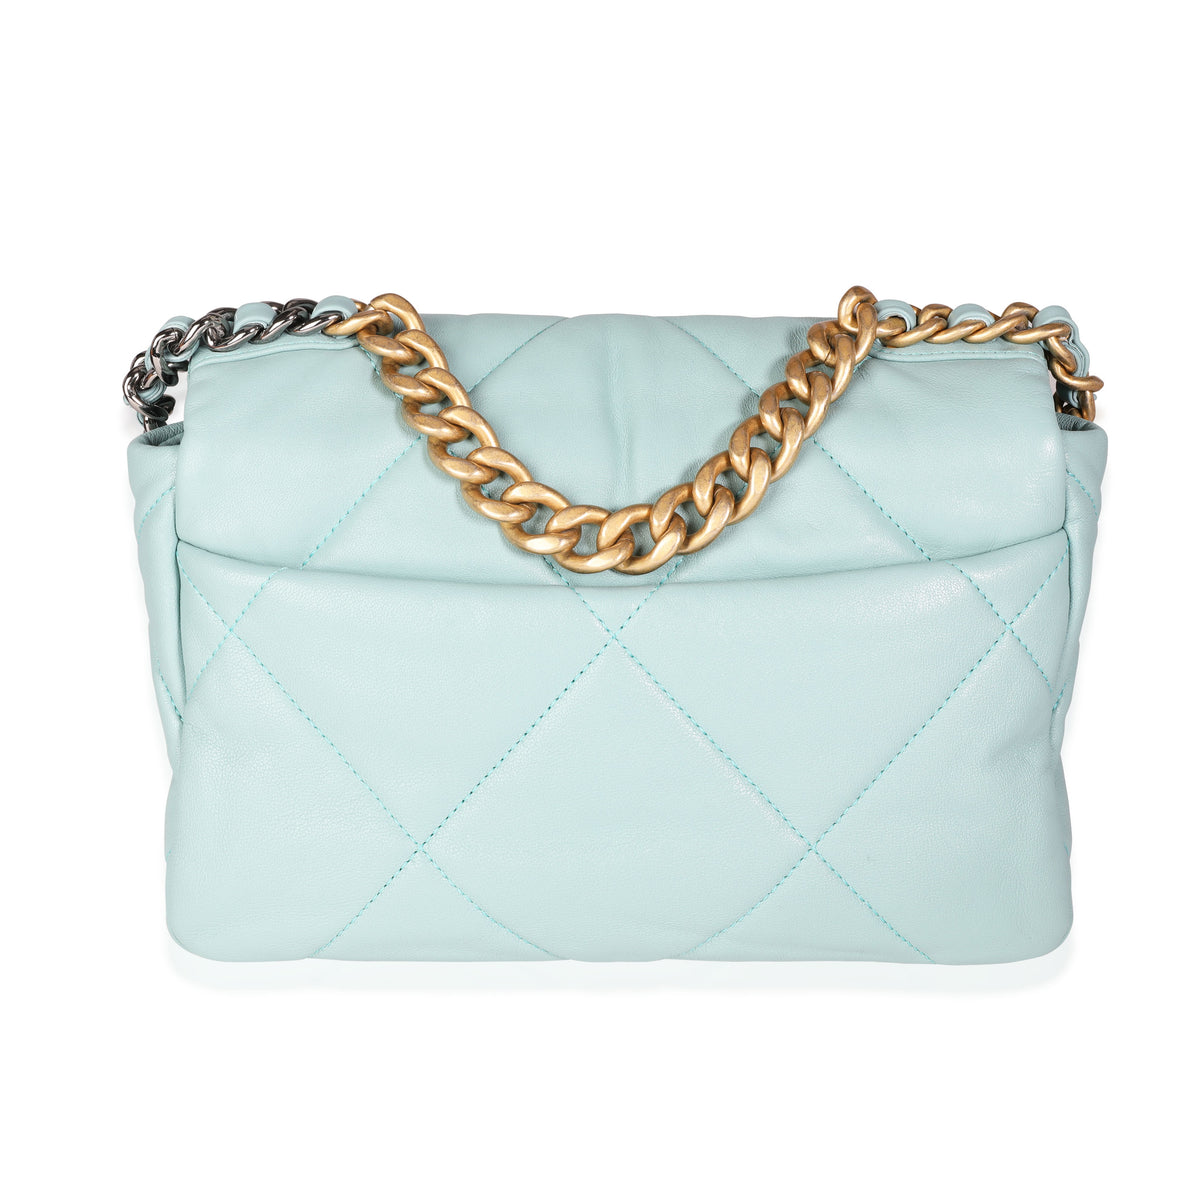 Chanel Pale Blue Quilted Lambskin Medium Chanel 19 Bag